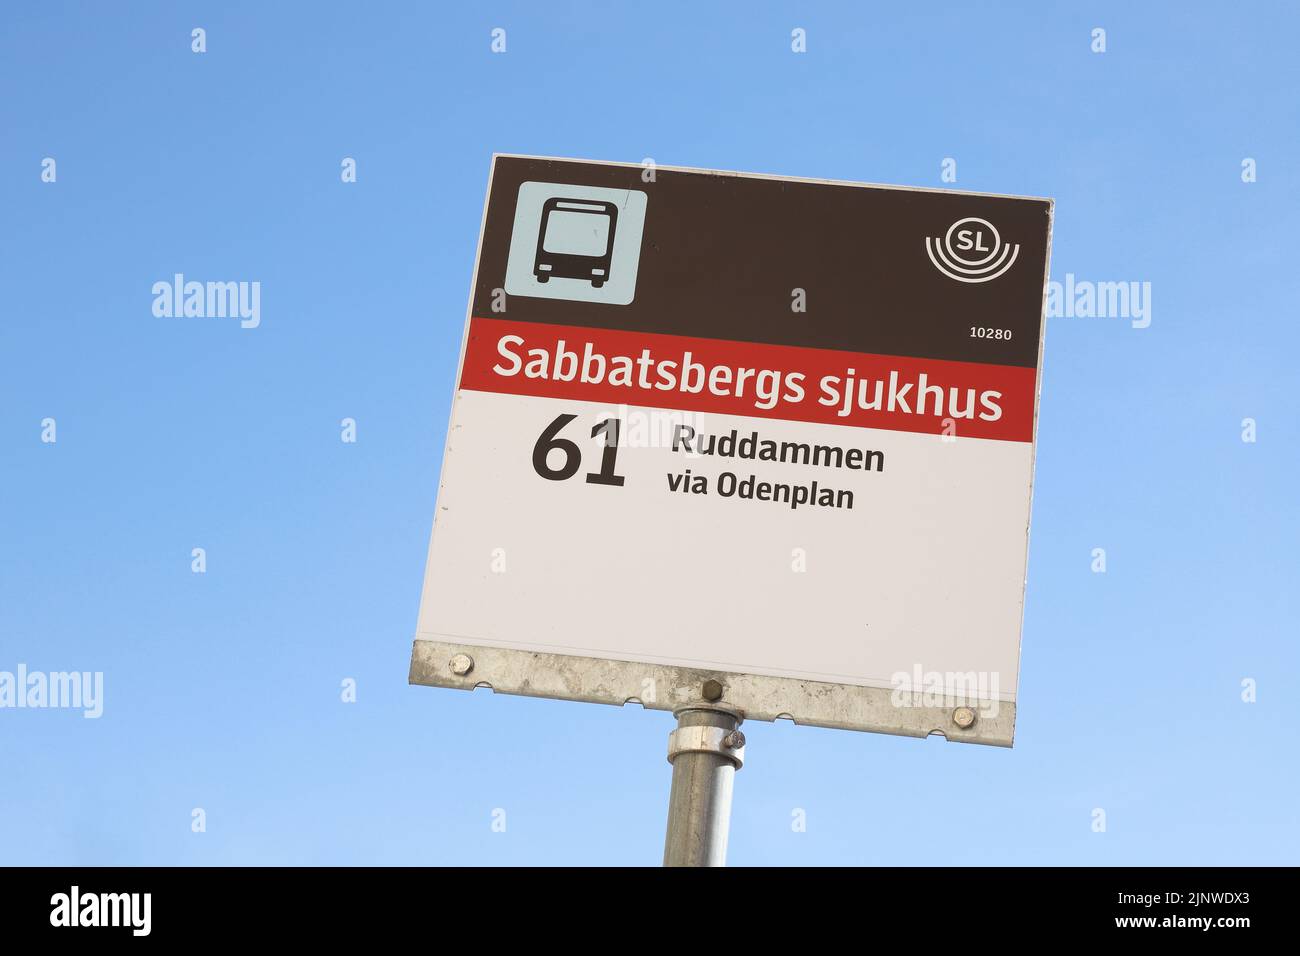 Stockholm, Sweden - August 11, 2022: Close-up view of the SL public transportation bus stop sign at the Sabbatsberg hospital. Stock Photo